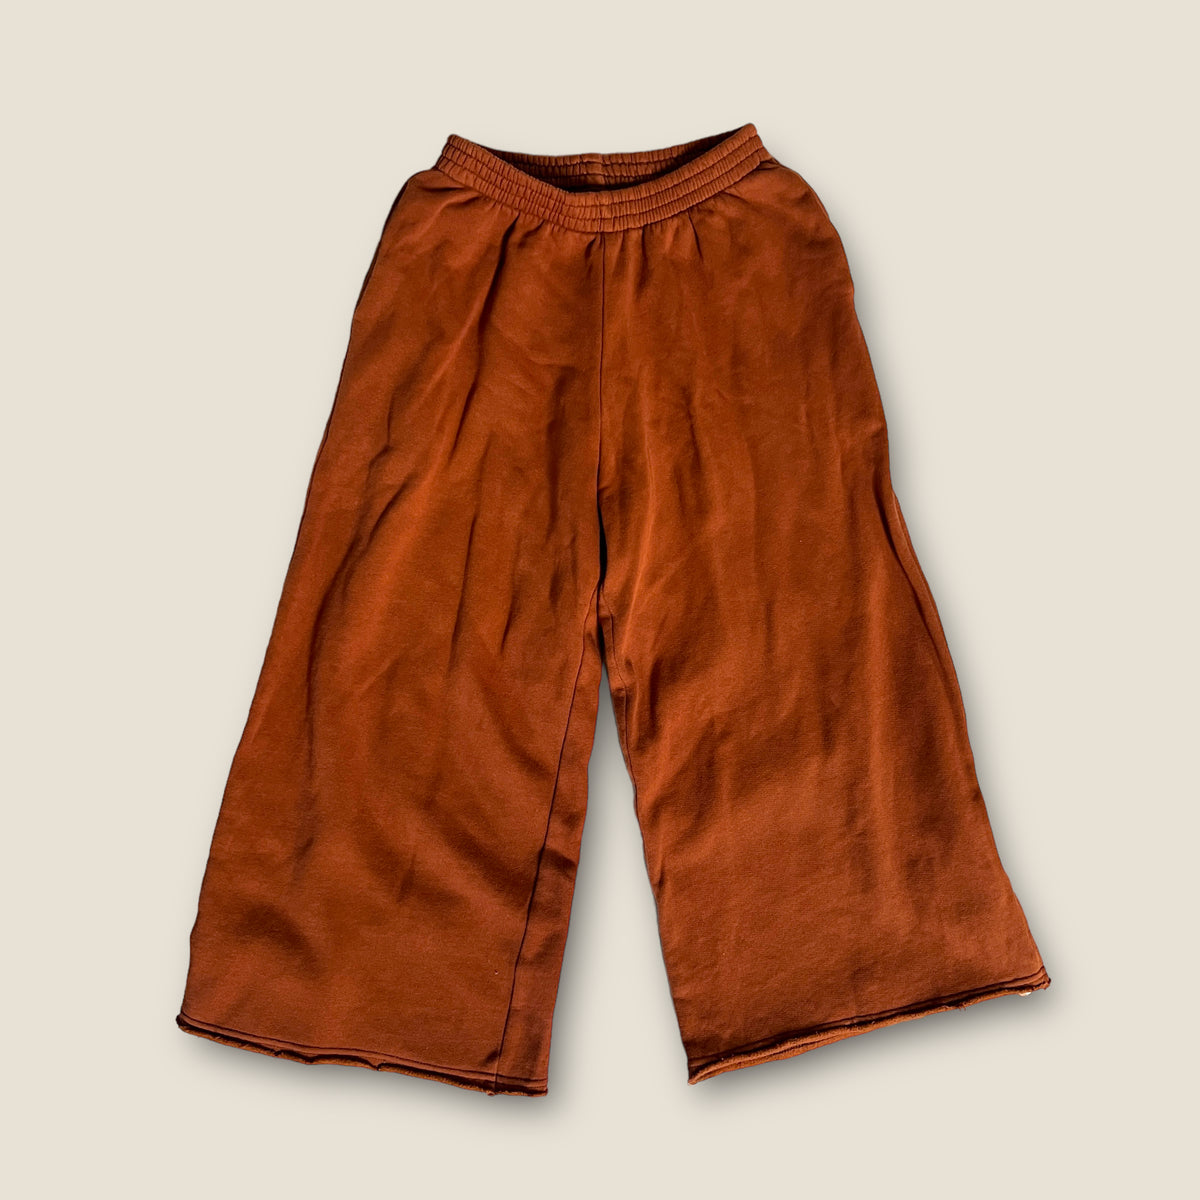 The New Society Sweatpant size 8 years